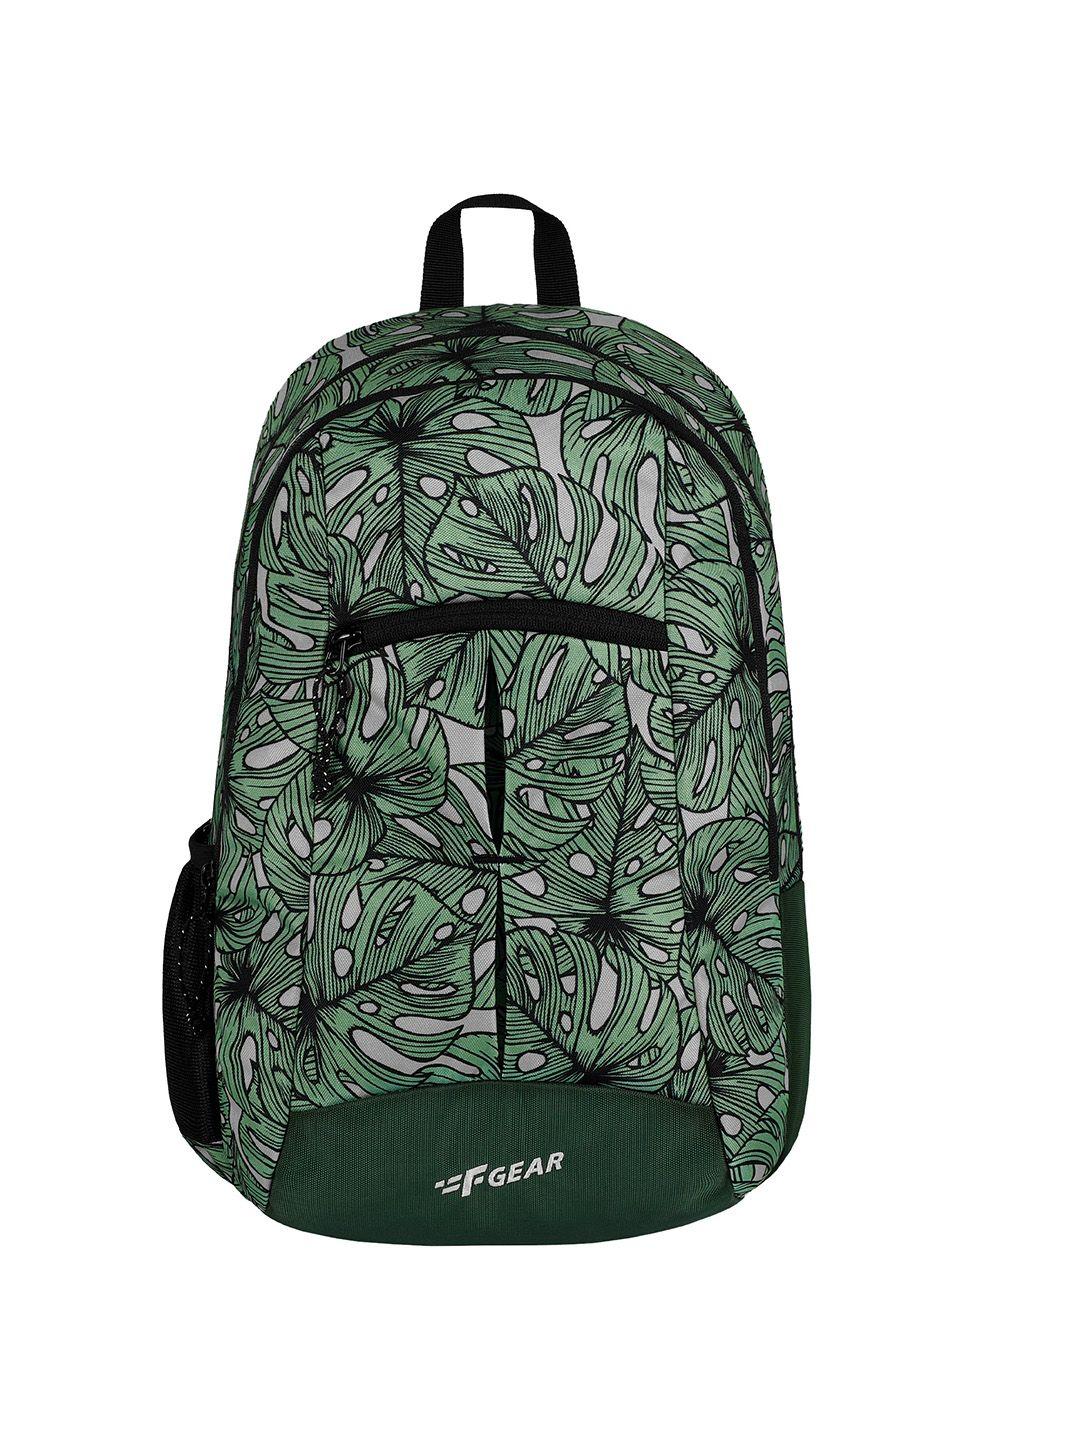 f gear printed padded backpack